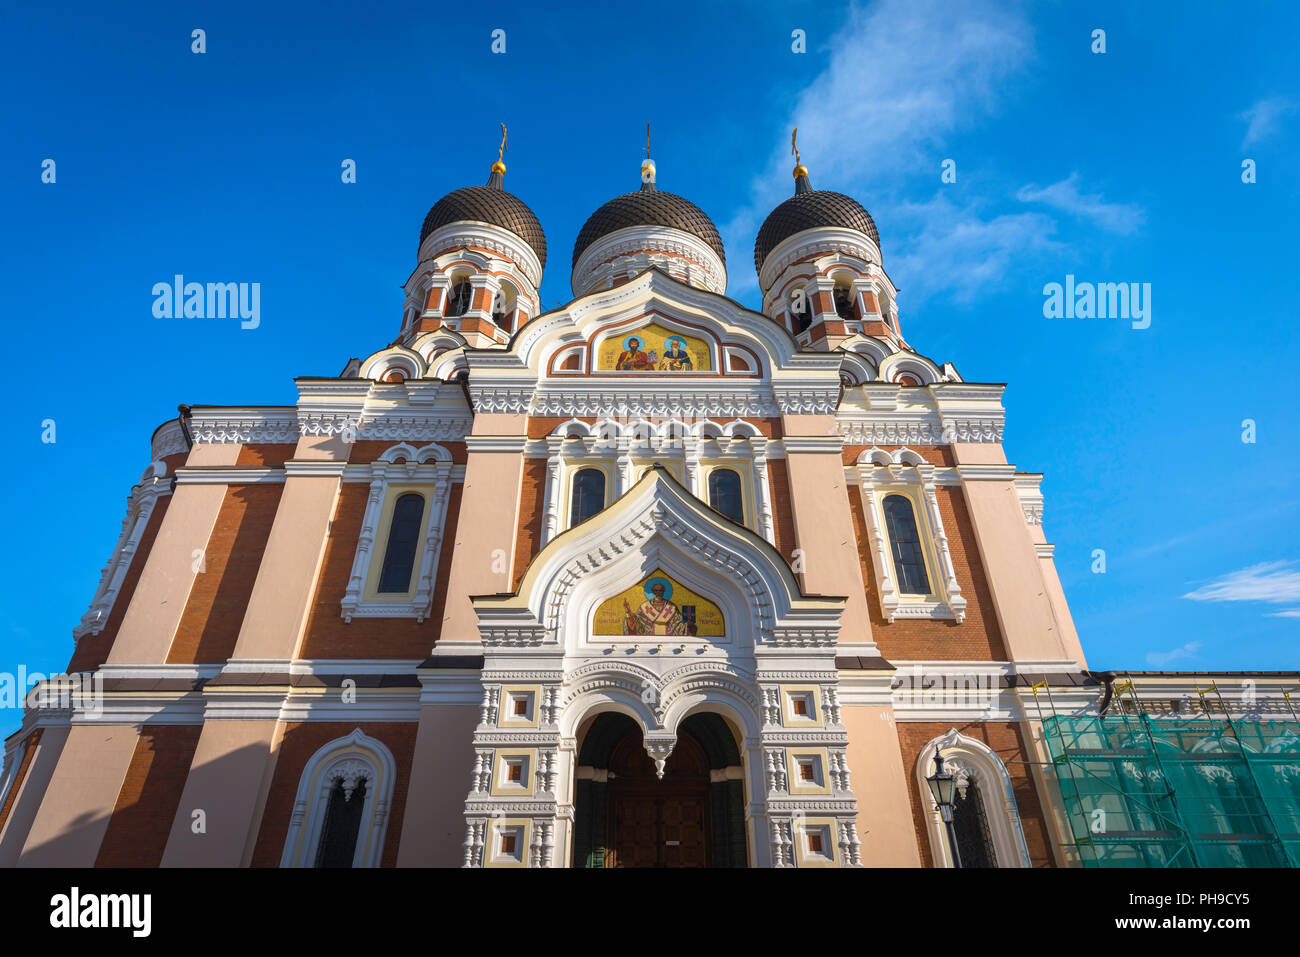 Tallinn cathedral, ground-level view of the front of the Alexander Nevsky Orthodox Cathedral sited on Toompea Hill in the centre of Tallinn, Estonia. Stock Photo